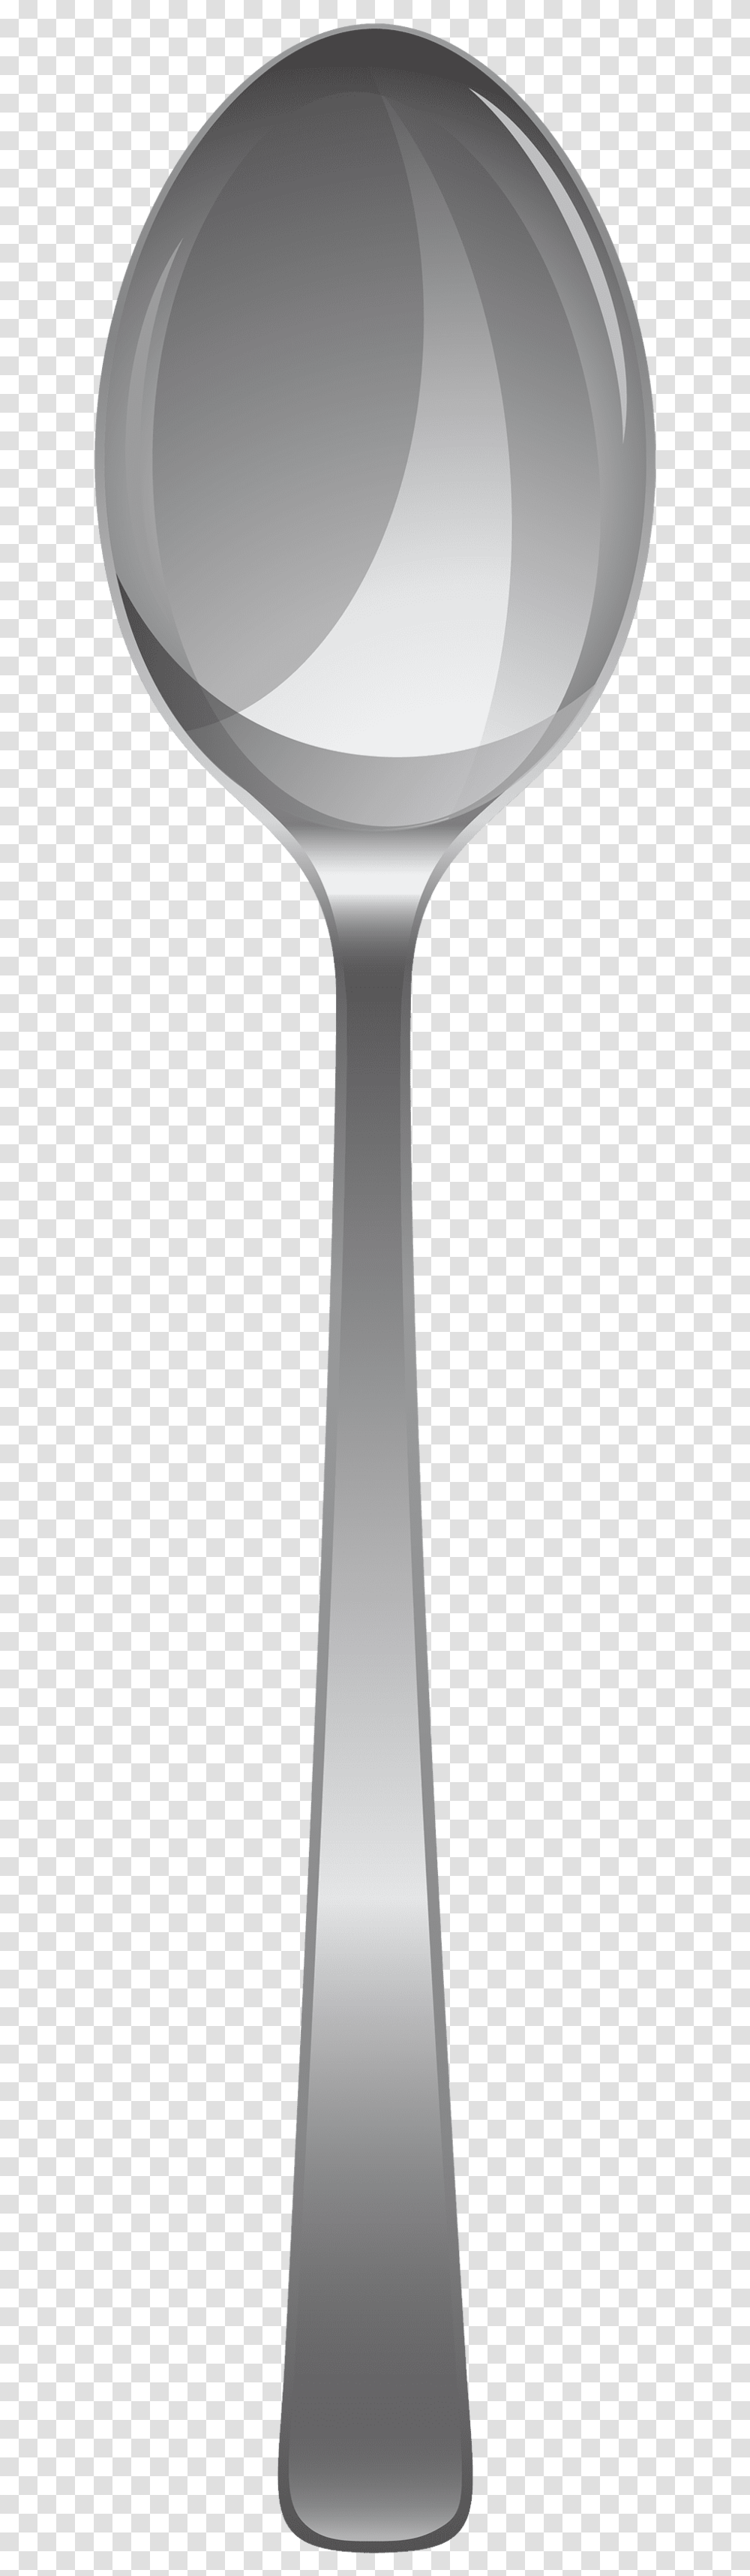 Download Photo Toppng Mirror, Cutlery, Spoon, Wooden Spoon, Pillow Transparent Png